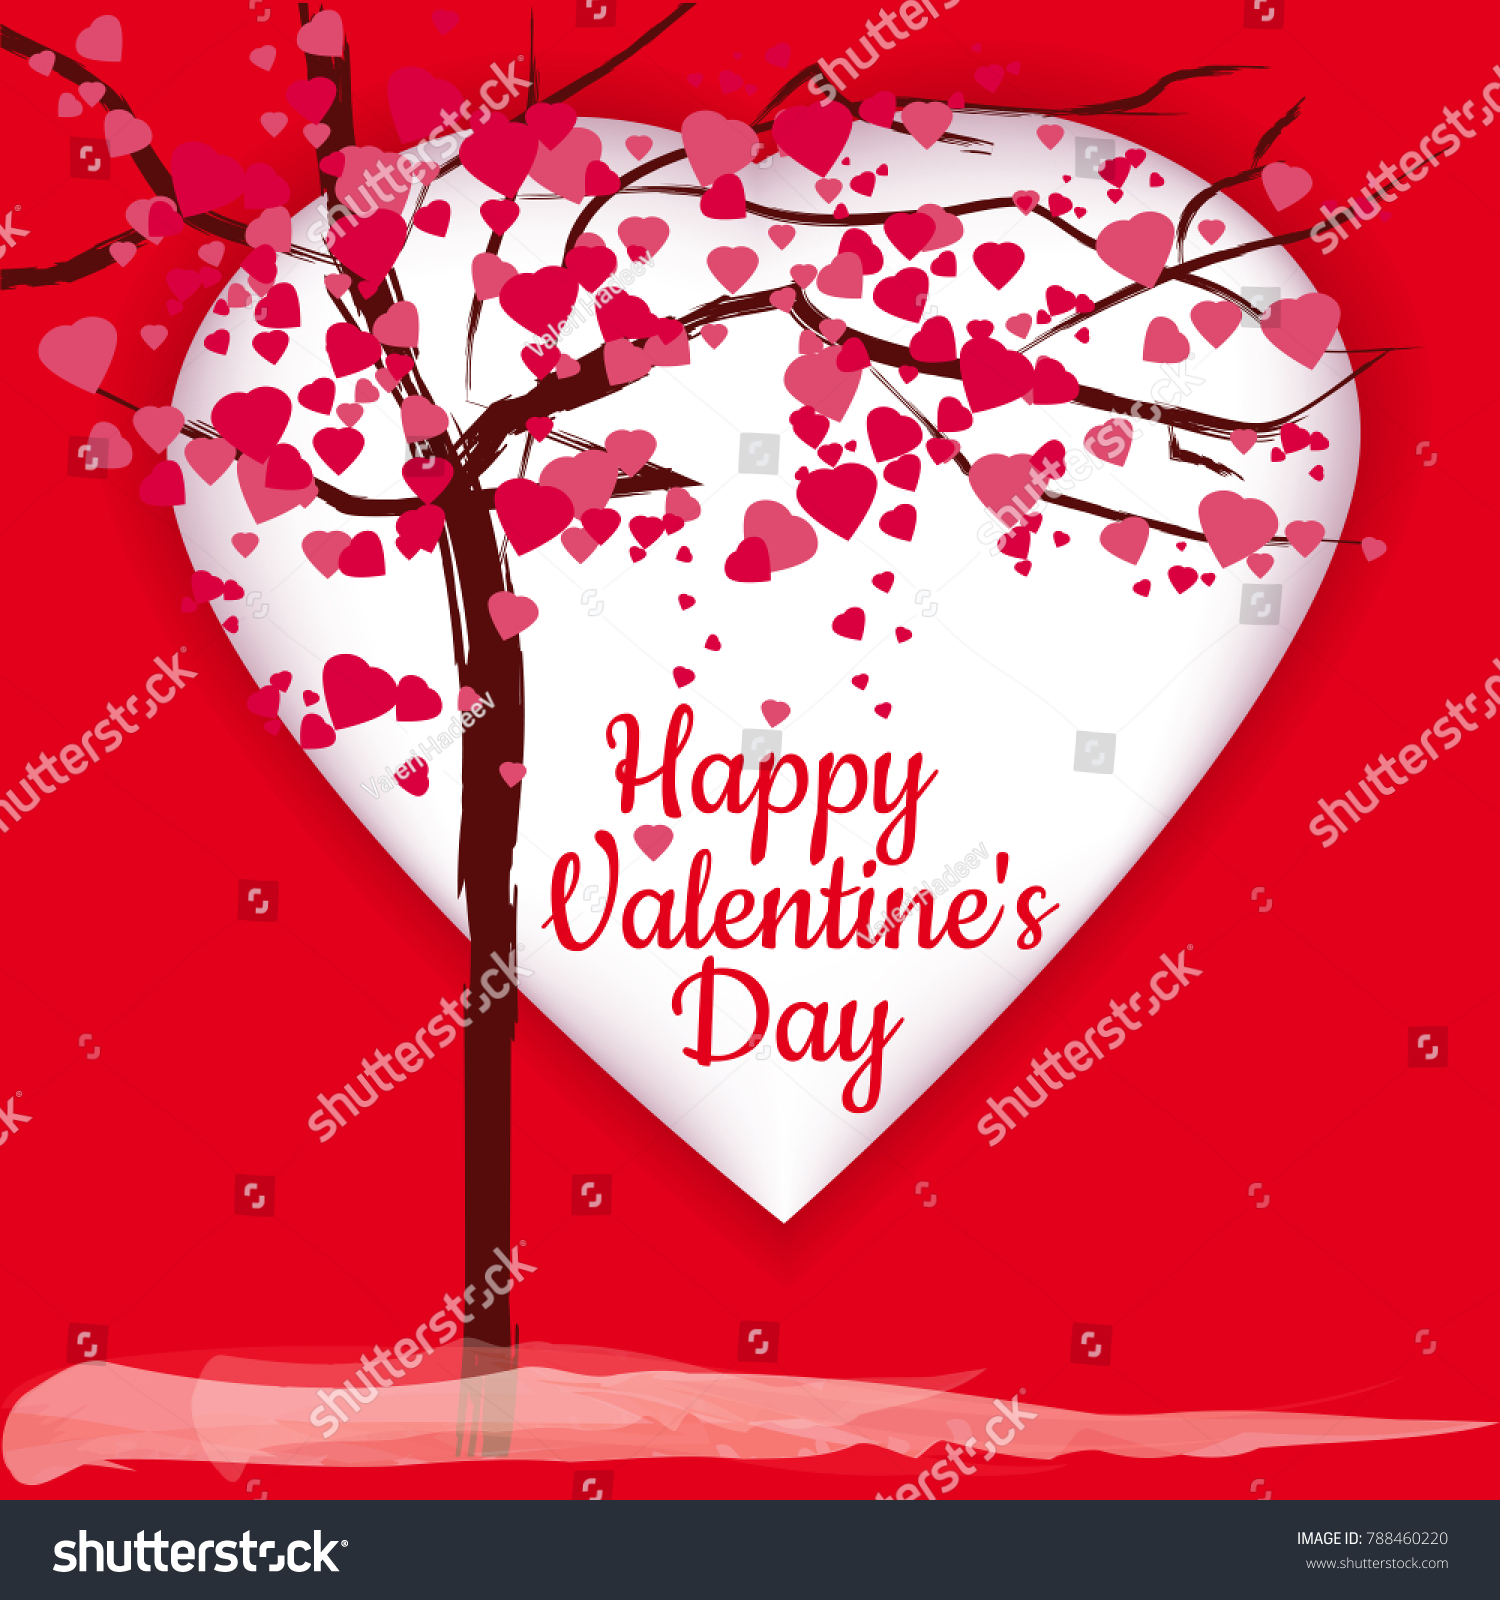 Valentine's day, tree of pink hearts, greeting card, background, red hearts, flare, vector, illustration, isolated #788460220